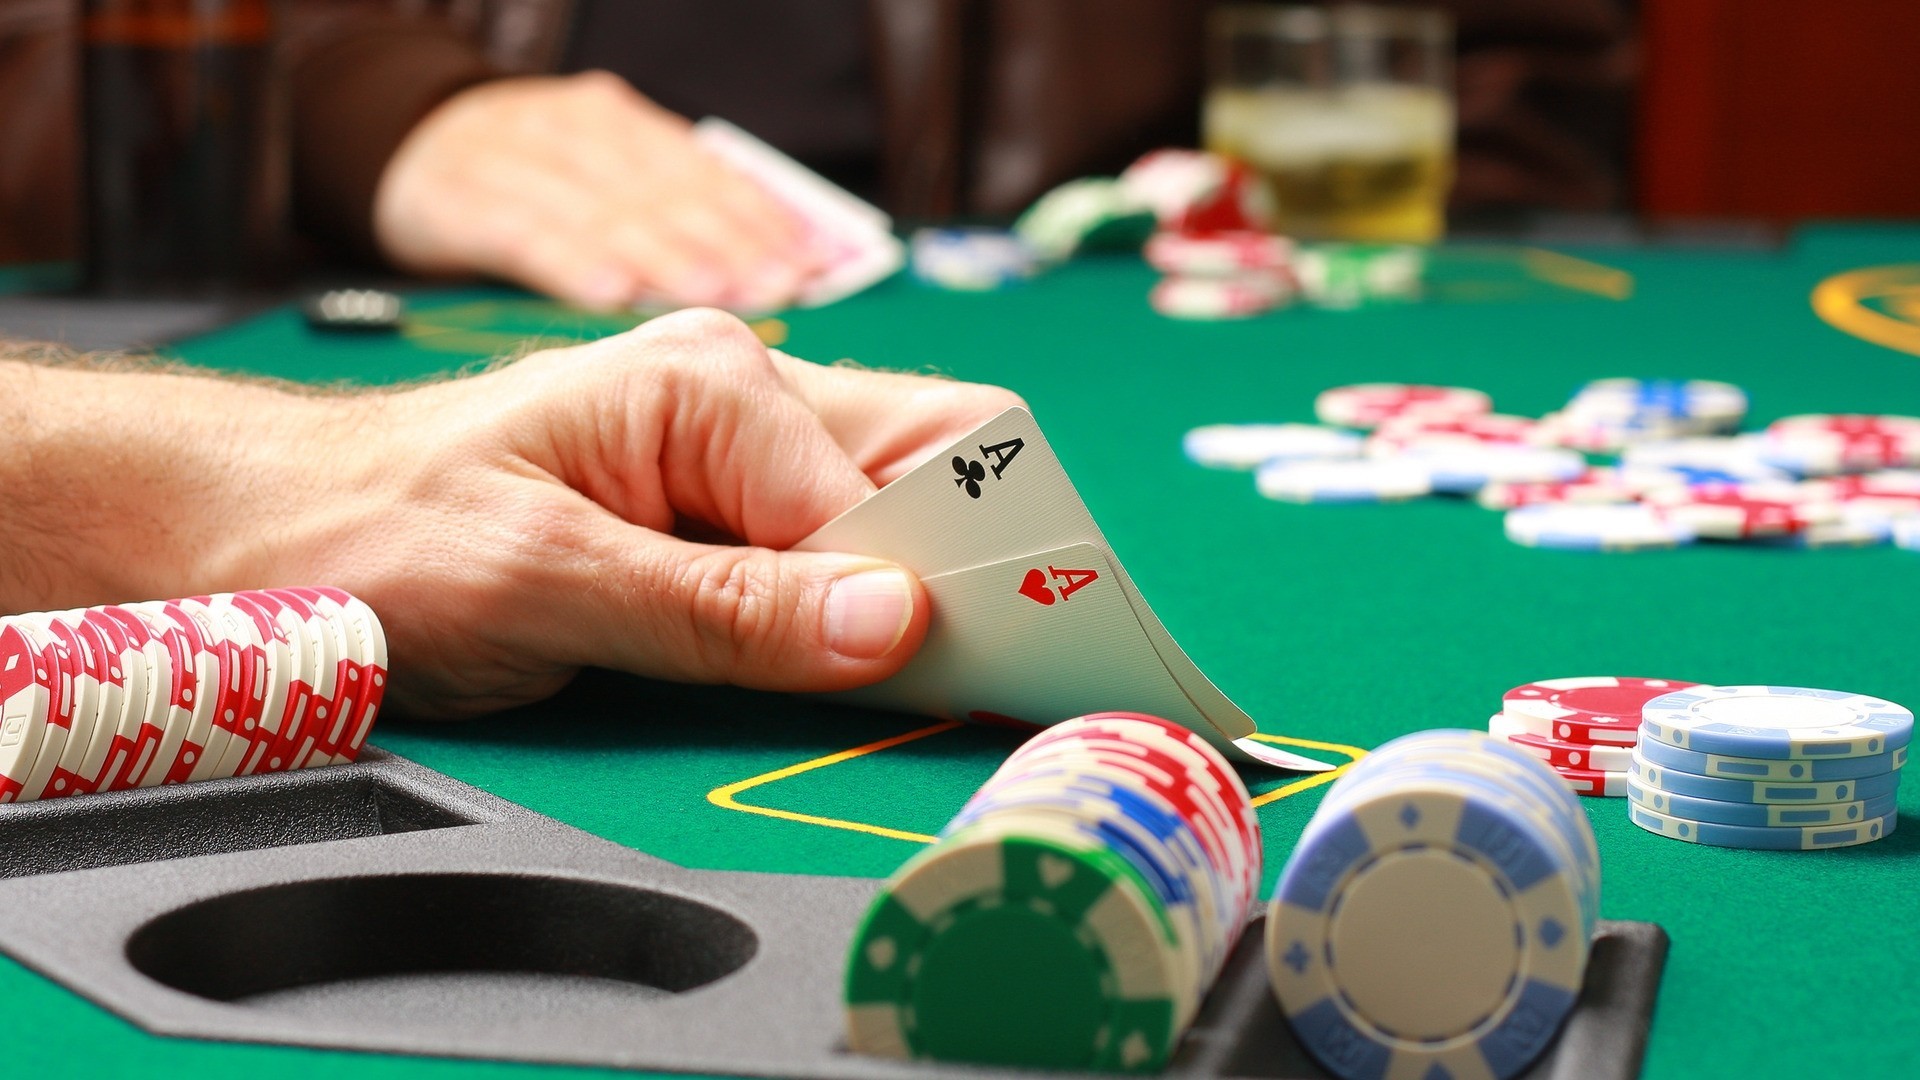 Are You Ready To Move The Online Casino Check?